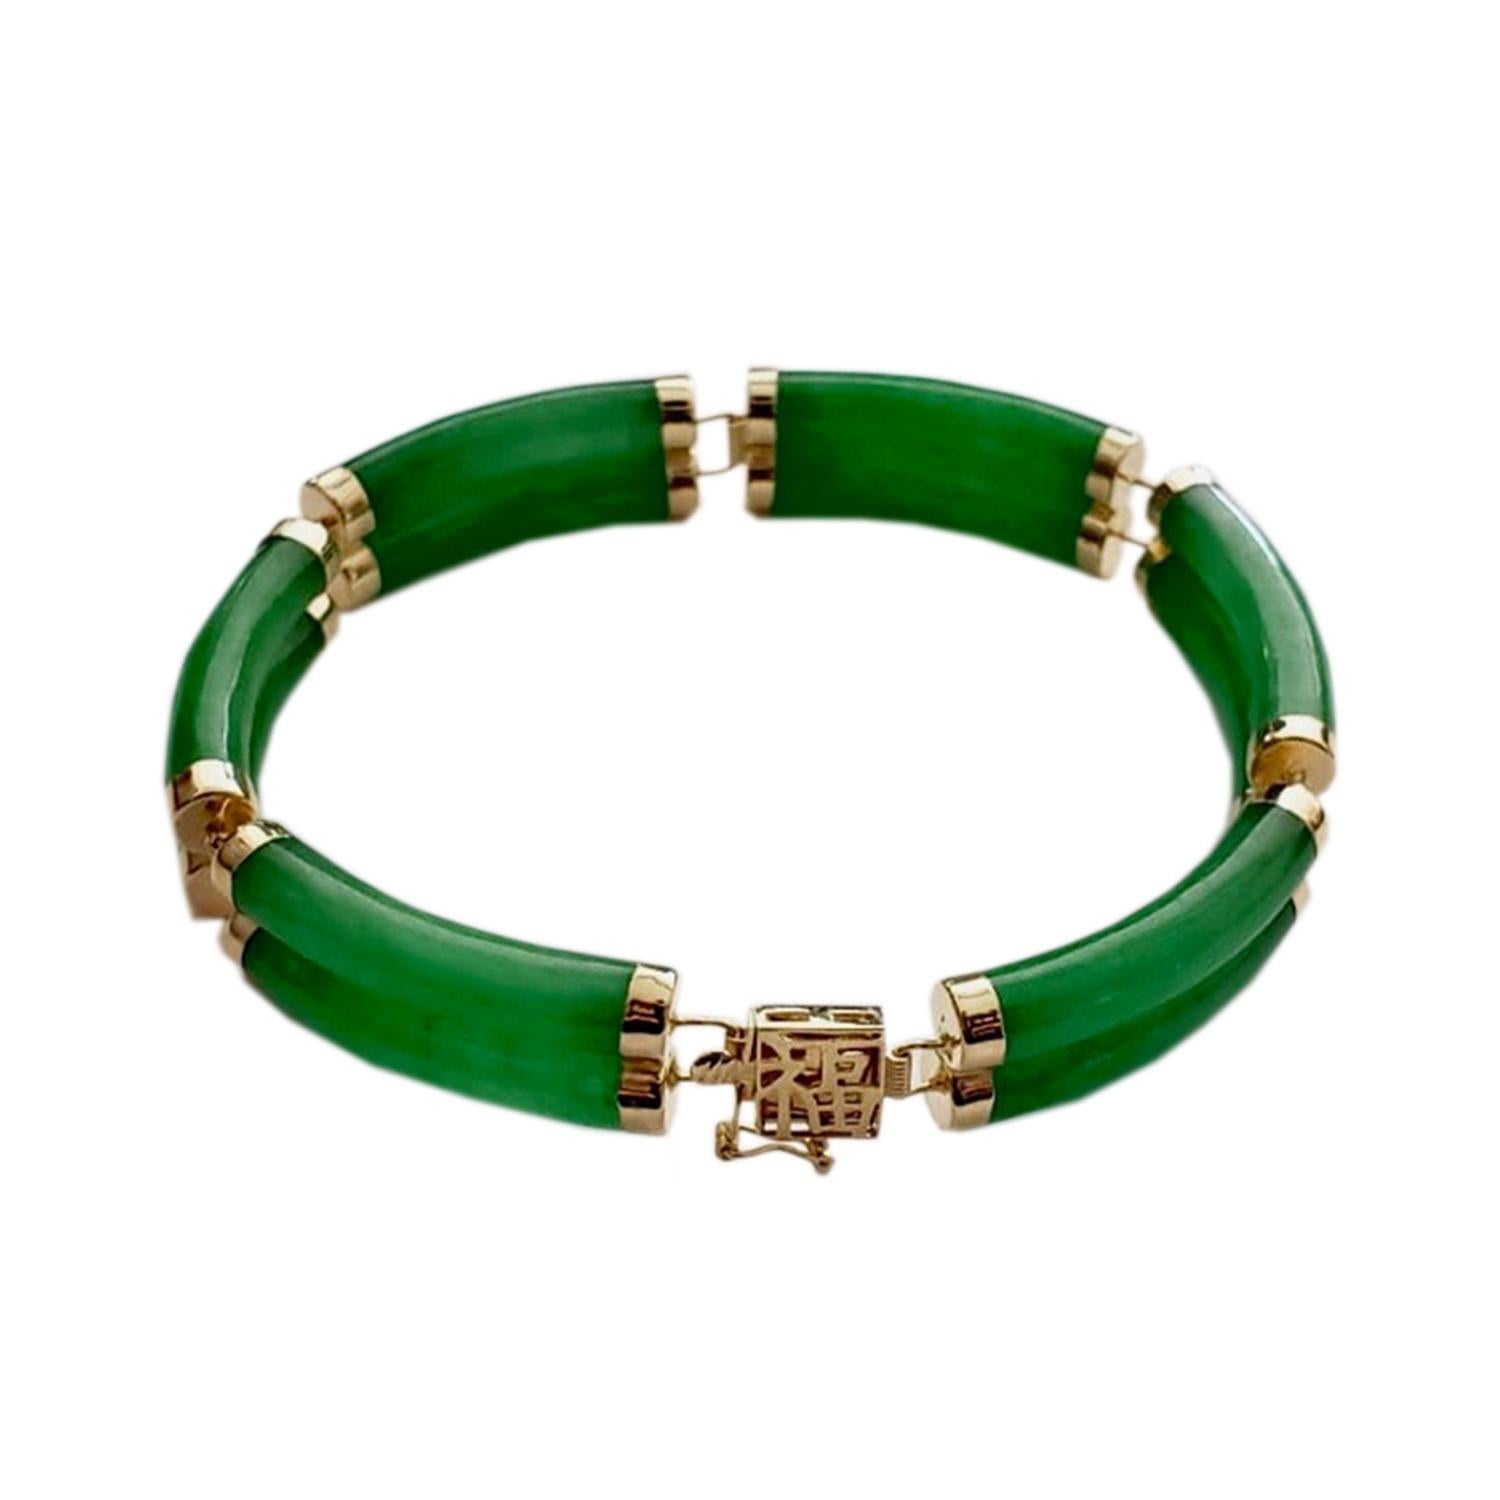 Fortune Jade Bracelet Double Bars with 14K Solid Yellow Gold links and clasp

Our 'Double Fu Fuku Fortune Jade Bracelet' embodies radiance and stature, with hand carved jade lengths intertwined with 14K Gold; a unisex statement. The two layers of